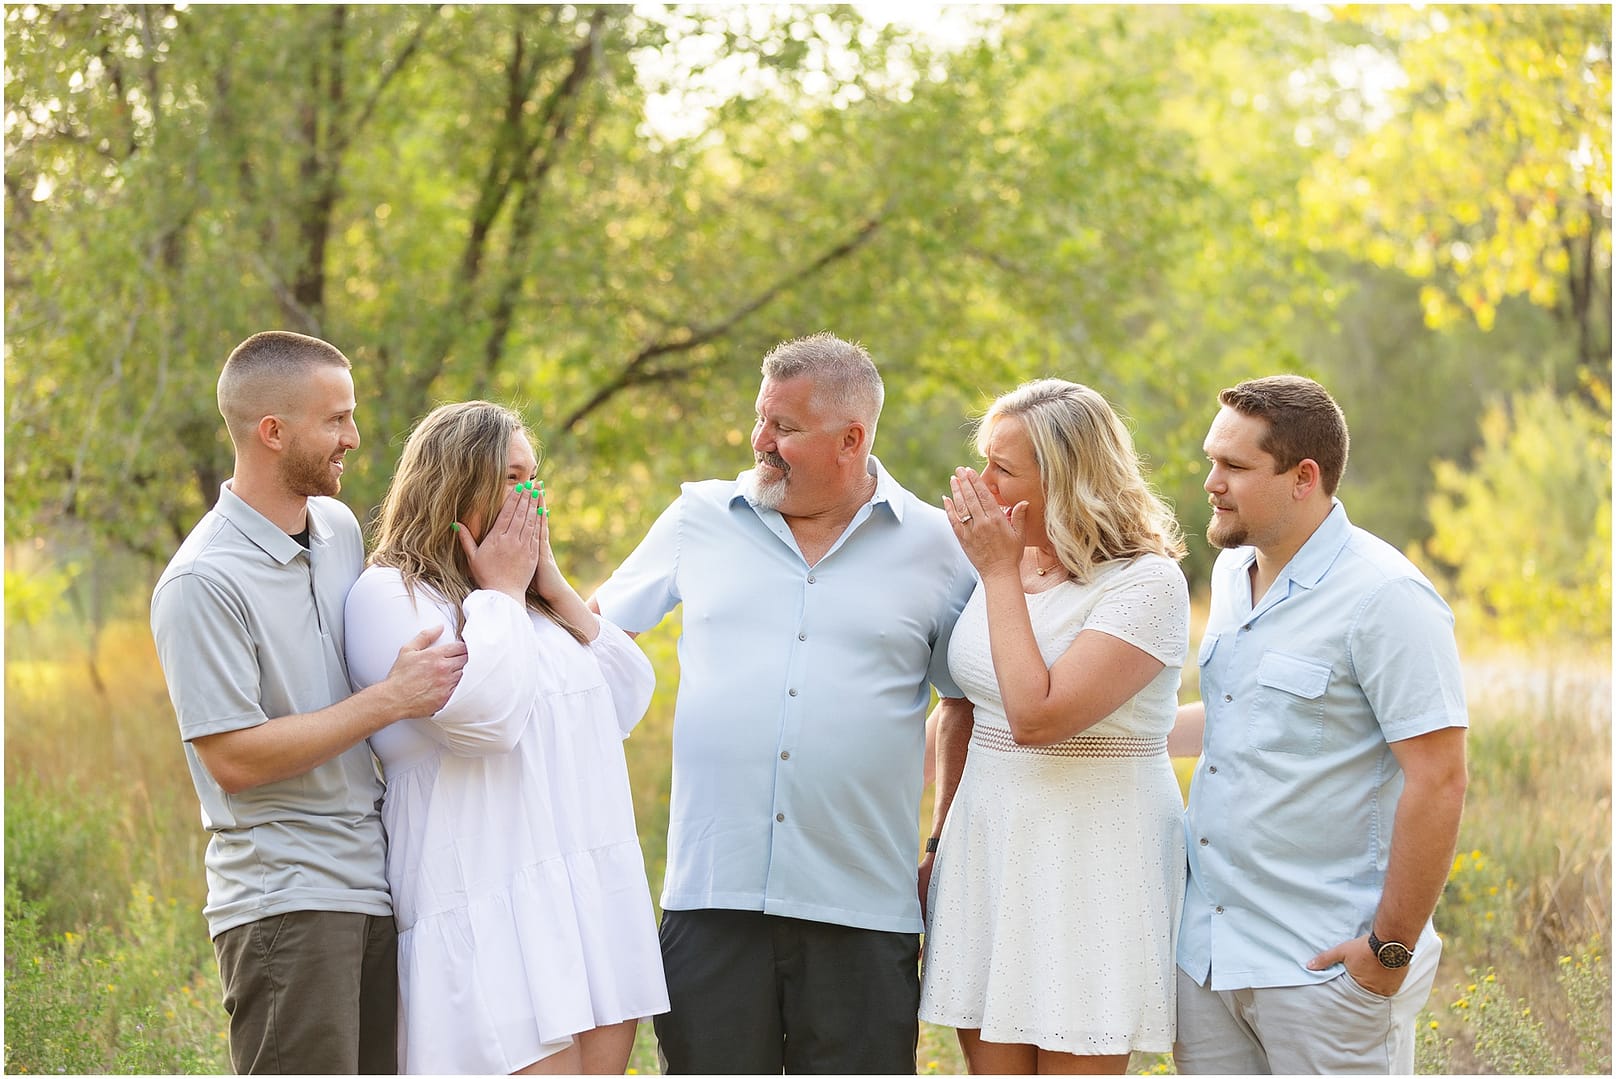 Parents are overjoyed upon learning of daughters pregnancy during Boise family photoshoot. Photo by Tiffany Hix Photography.